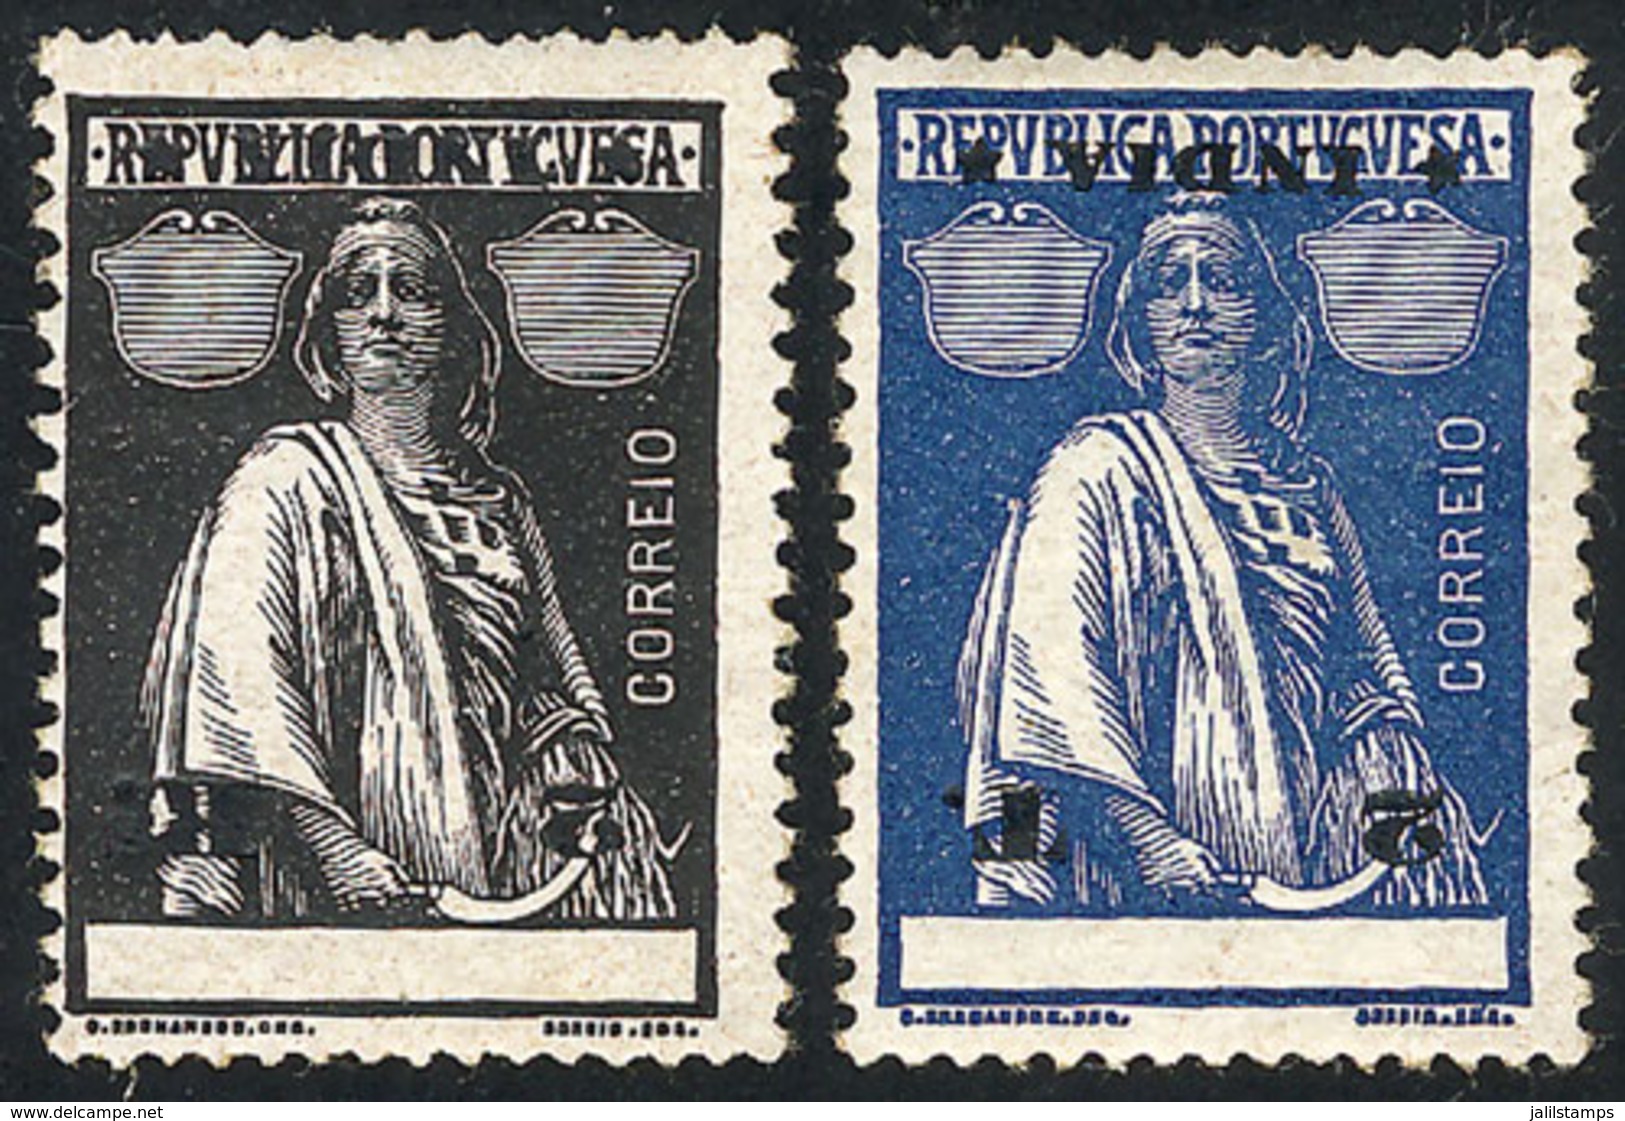 PORTUGUESE INDIA: Sc.359 + 369, 1914 2r. Black And 2T. Blue, Both With Impression Of BLACK COLOR INVERTED, VF! - Portuguese India